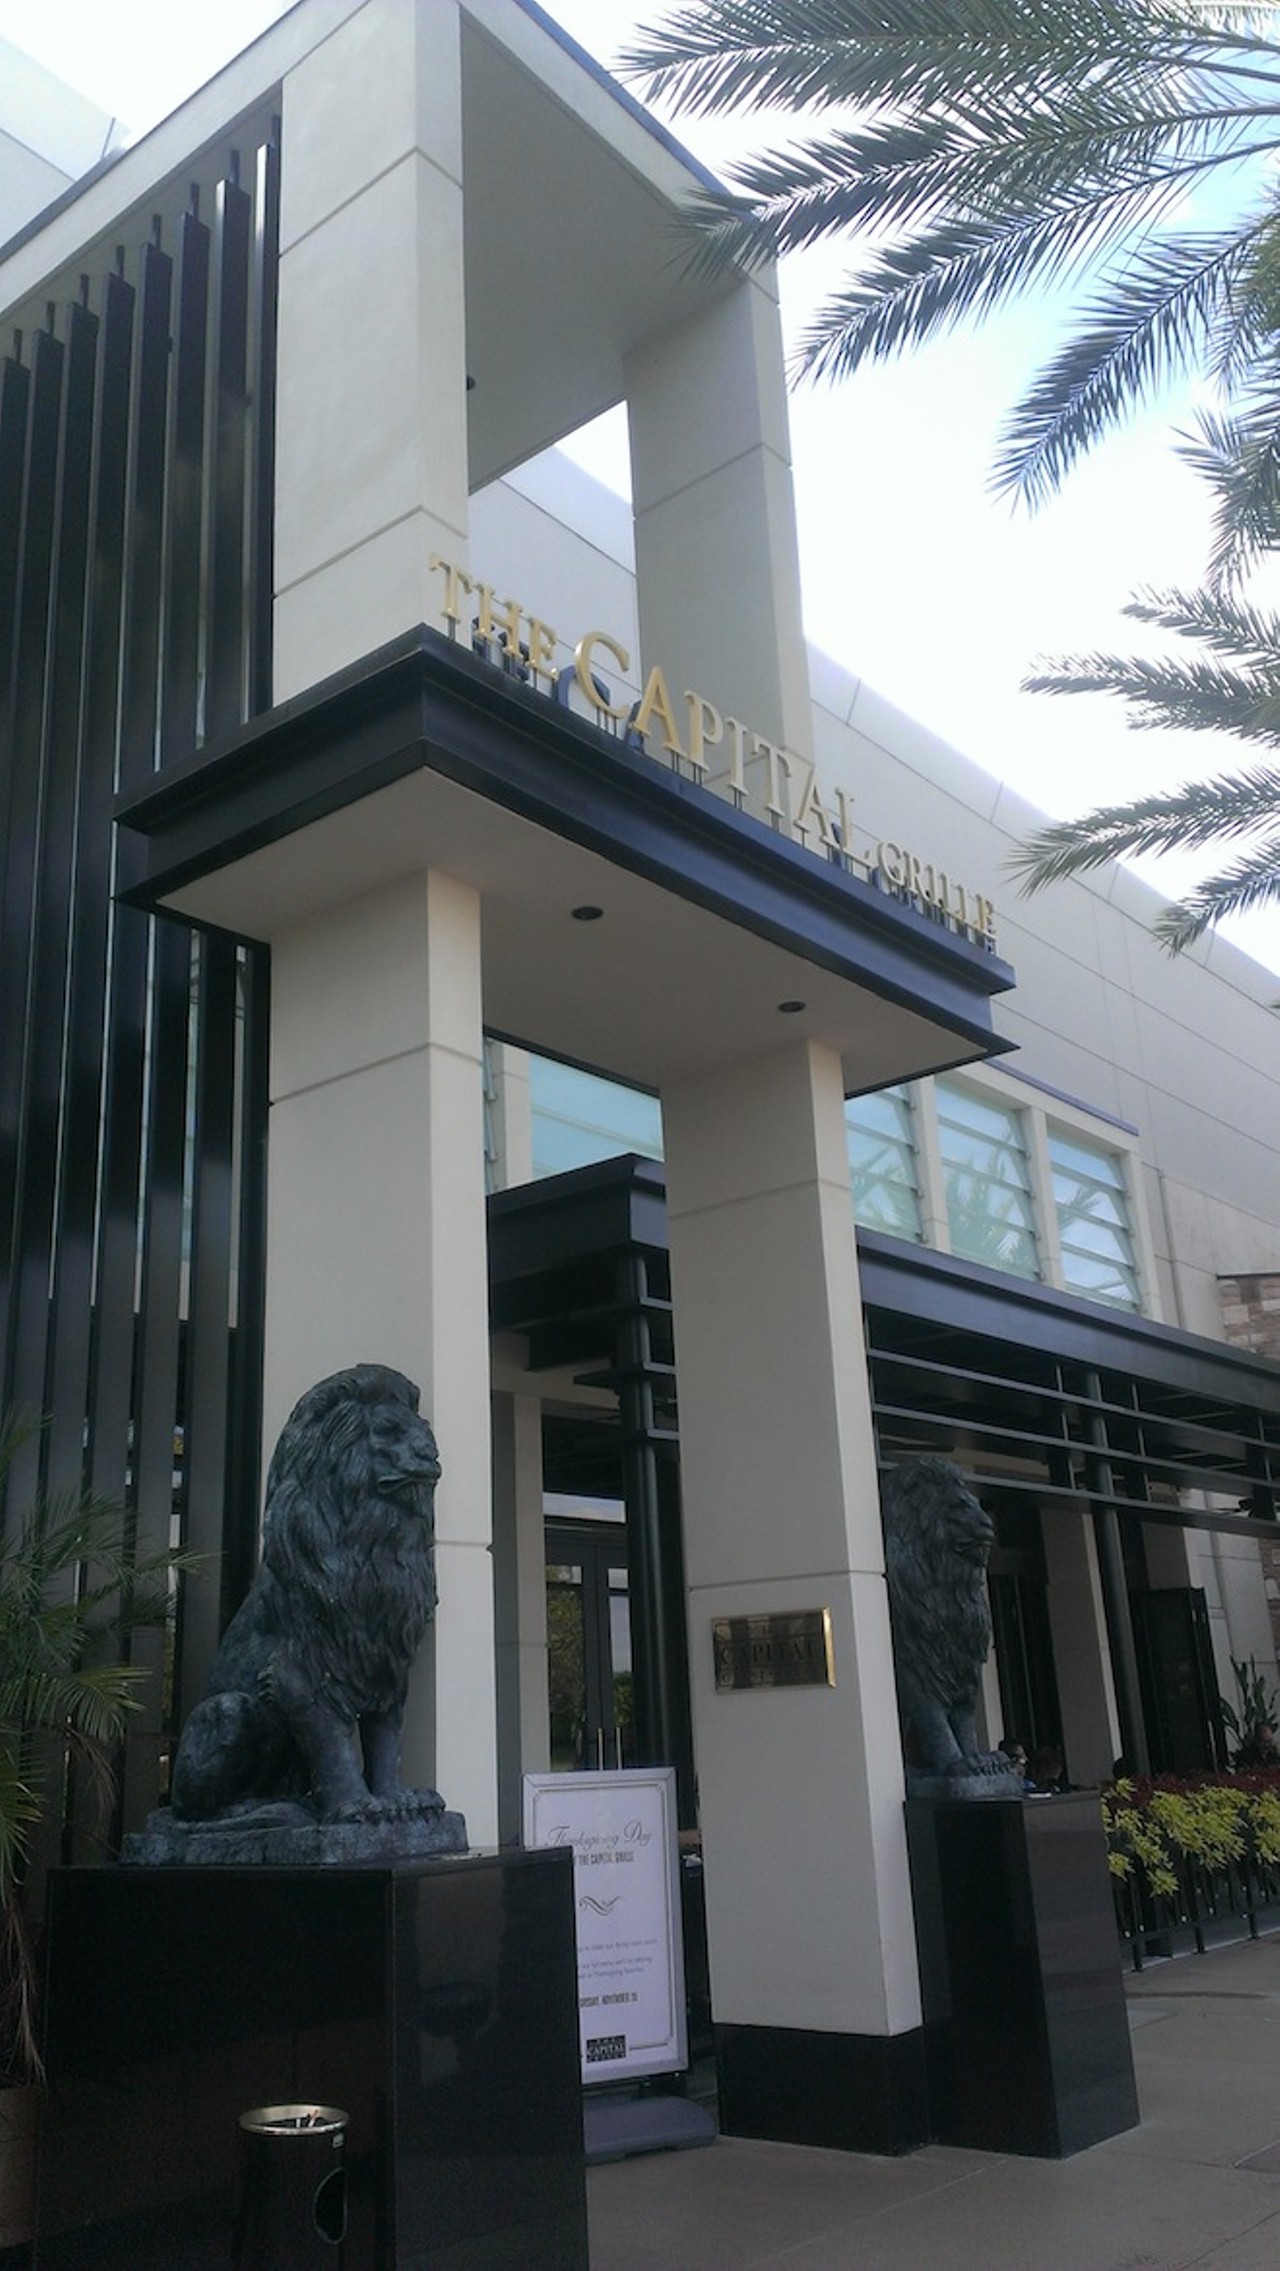 Capital Grille (4200 Conroy Road, Suite 146A)